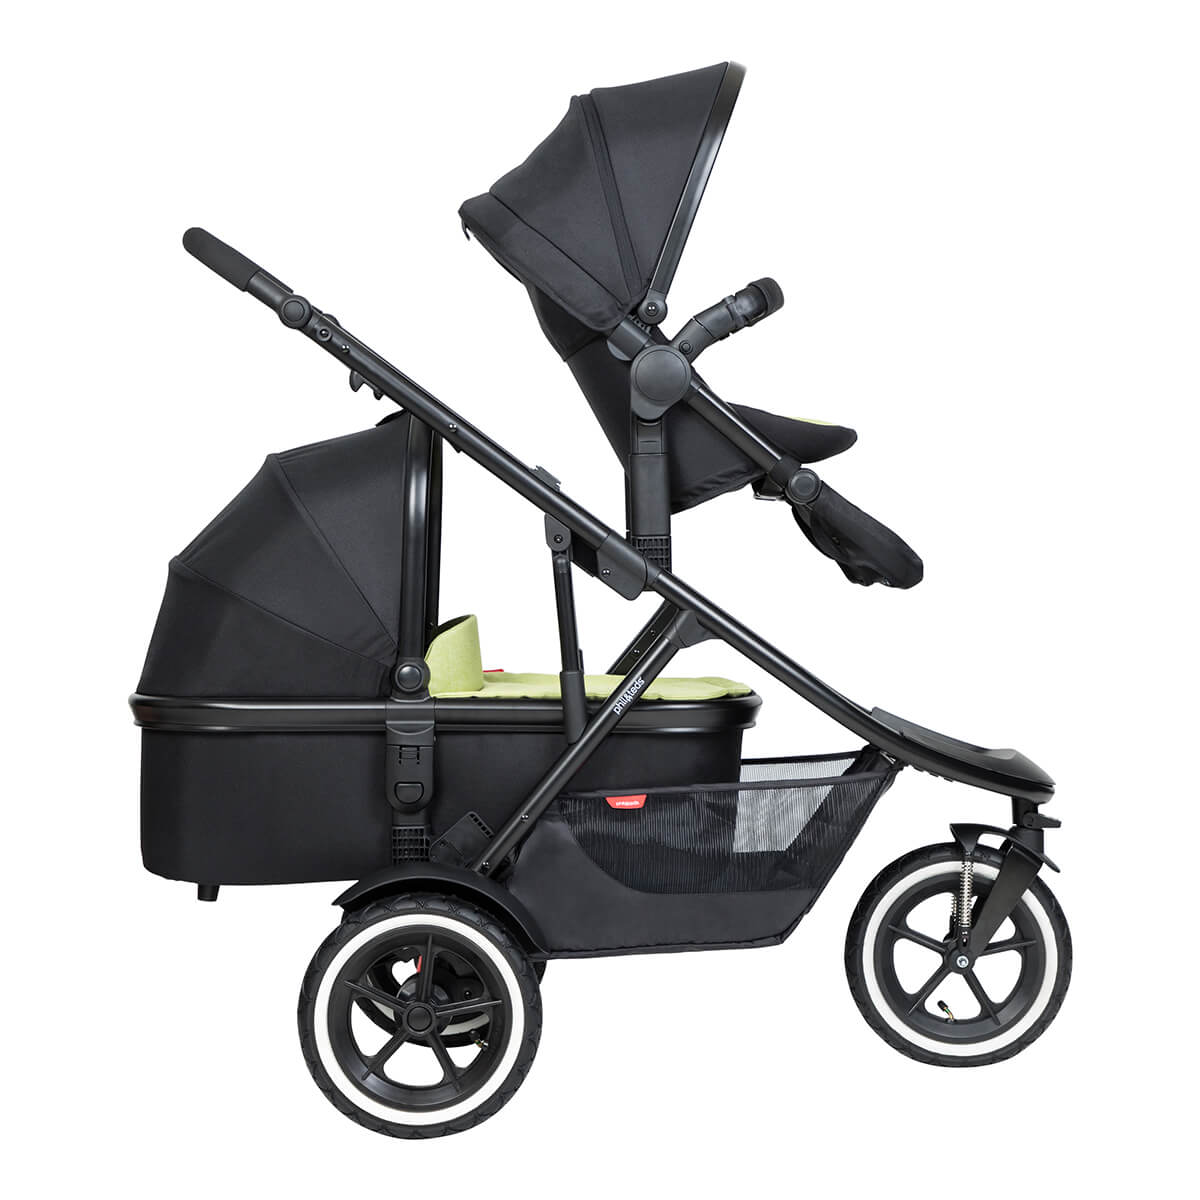 https://cdn.accentuate.io/4417284964386/19437753499826/philteds-sport-buggy-with-double-kit-extended-clip-and-snug-carrycot-side-view-v1626482791937.jpg?1200x1200